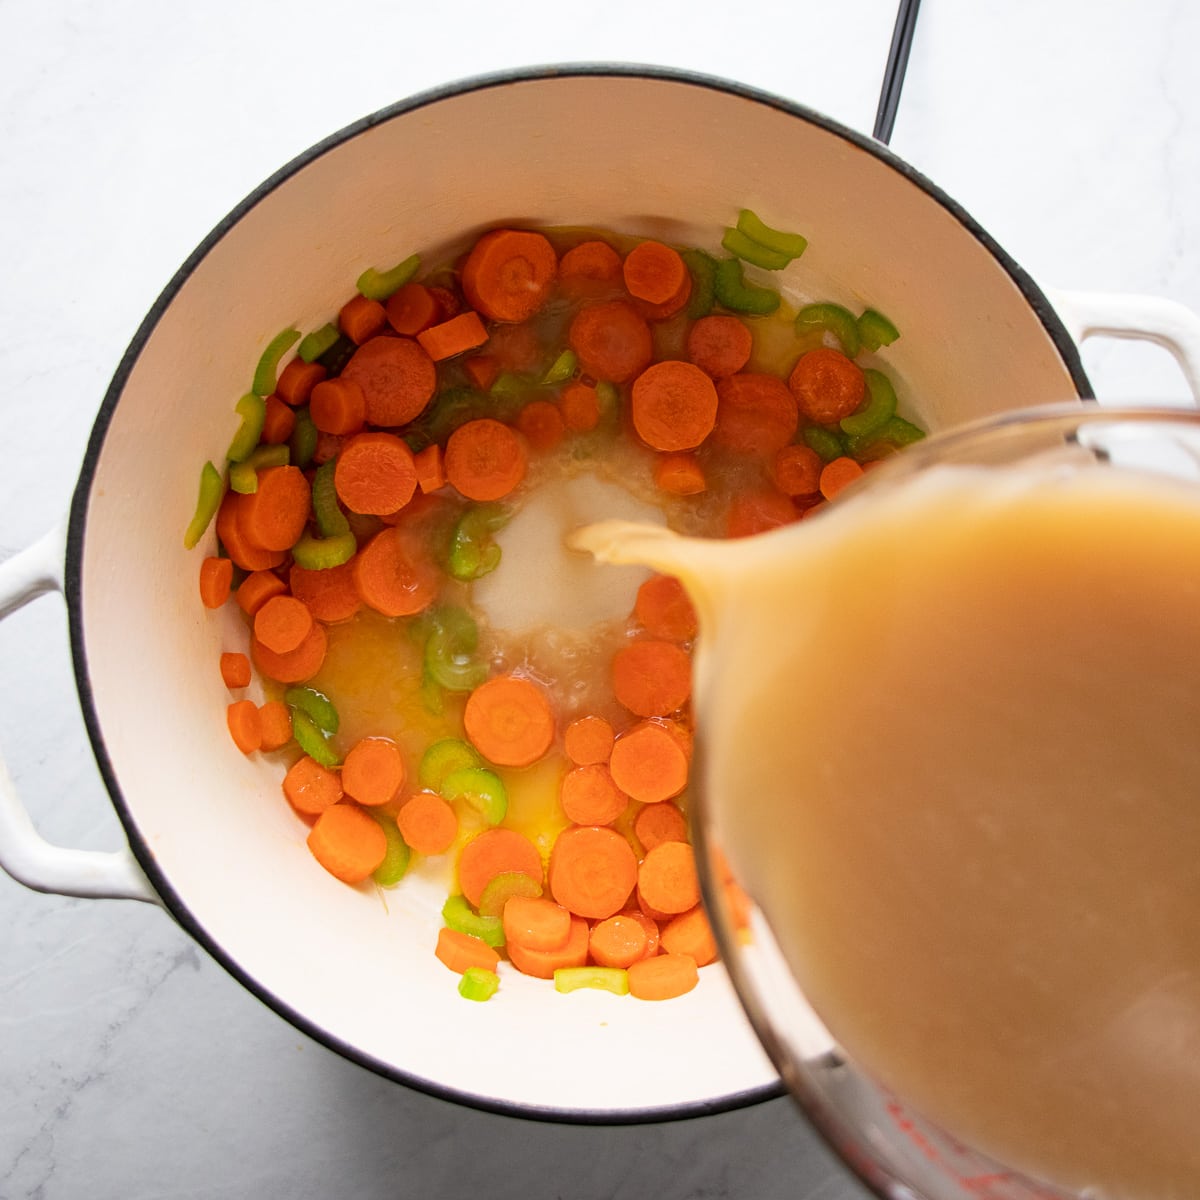 Pouring low FODMAP chicken broth into a Dutch oven containing sautéed carrots and celery pieces.